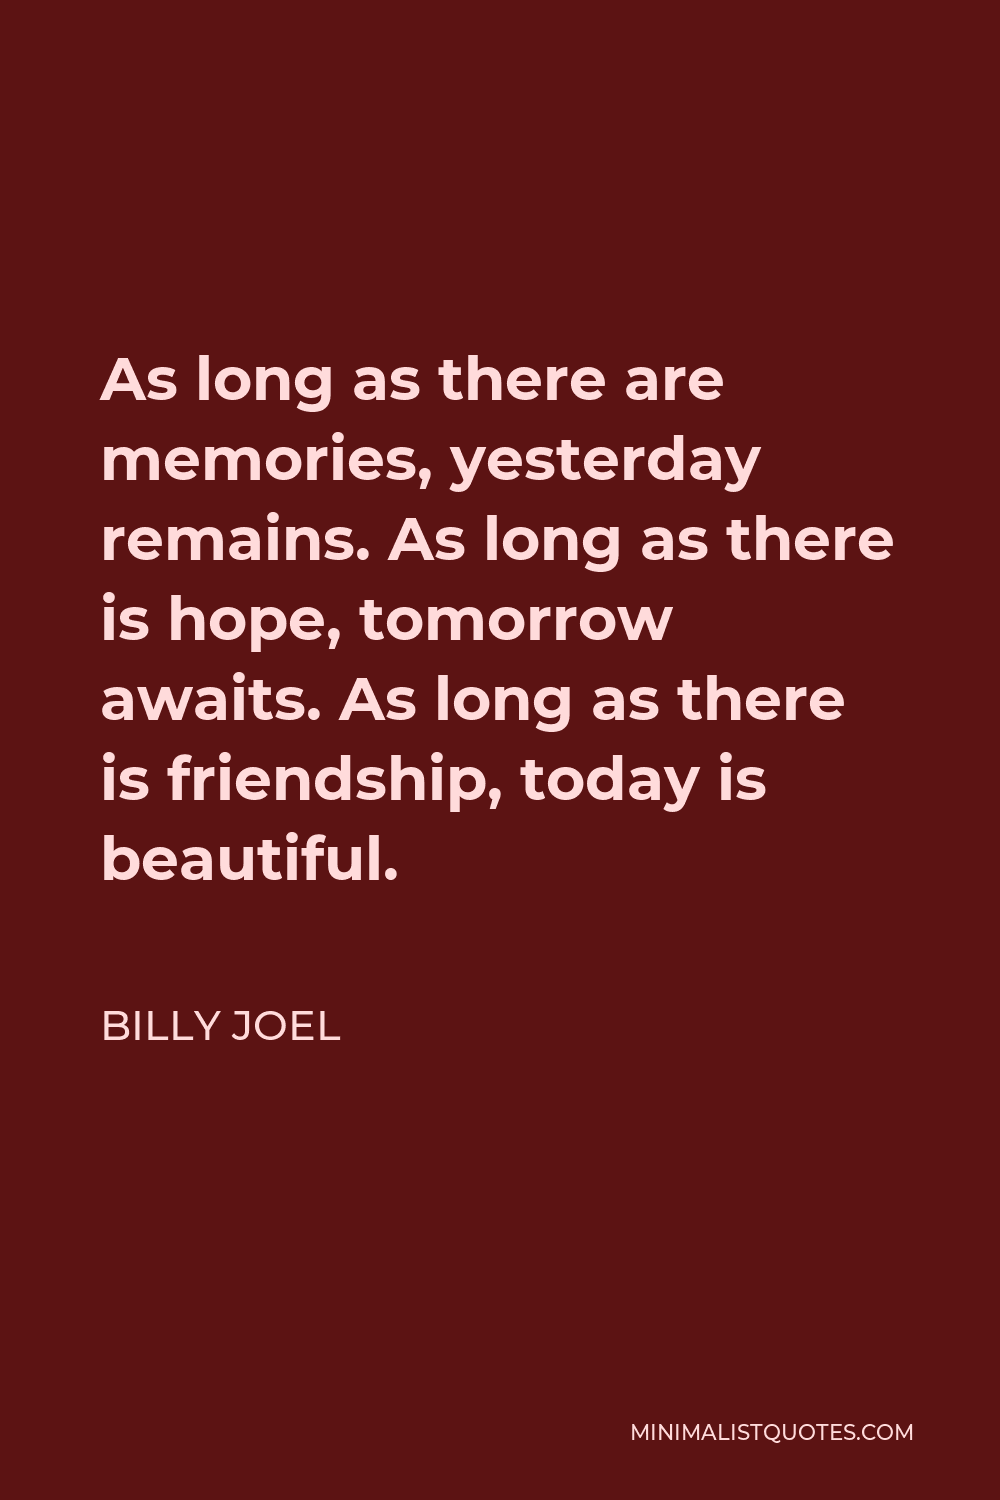 Billy Joel Quote - As long as there are memories, yesterday remains. As long as there is hope, tomorrow awaits. As long as there is friendship, today is beautiful.